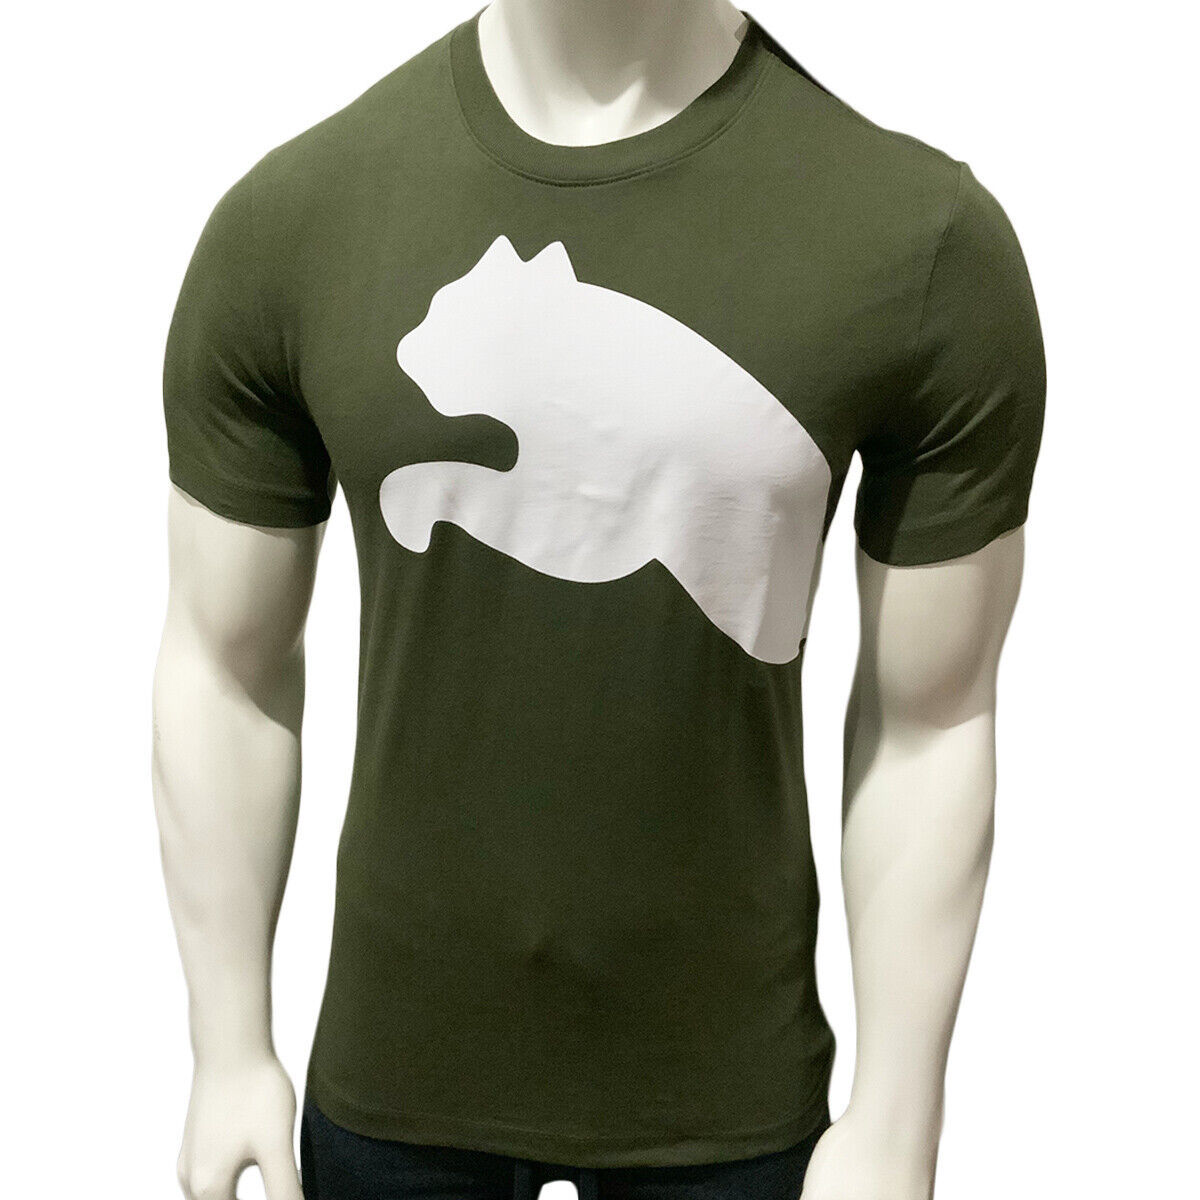 Primary image for NWT PUMA MSRP $42.99 OVERSIZED LOGO MEN'S GREEN SHORT SLEEVE CREW NECK T-SHIRT